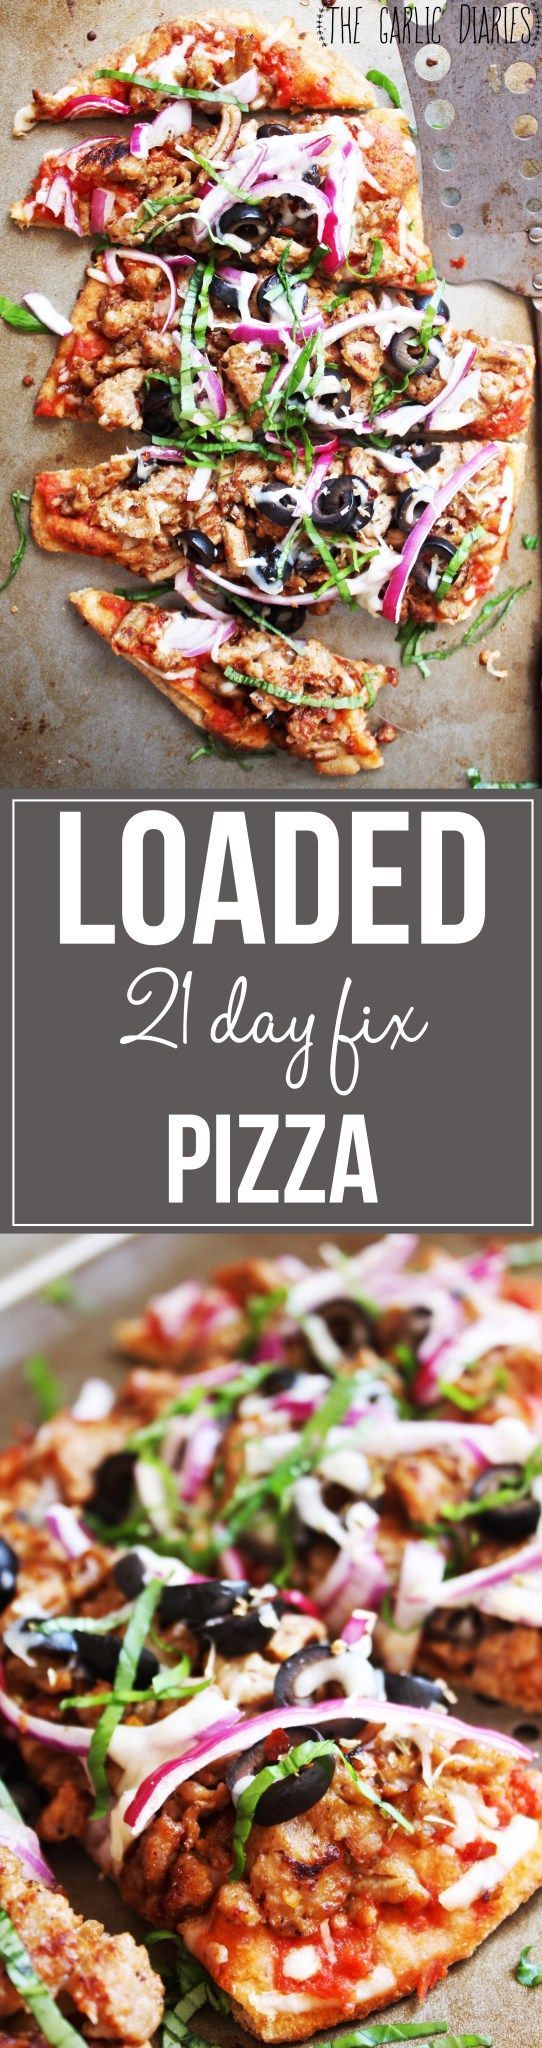 Loaded 21 Day Fix Pizza – This delicious pizza piled high with meat and veggies will trick your brain and